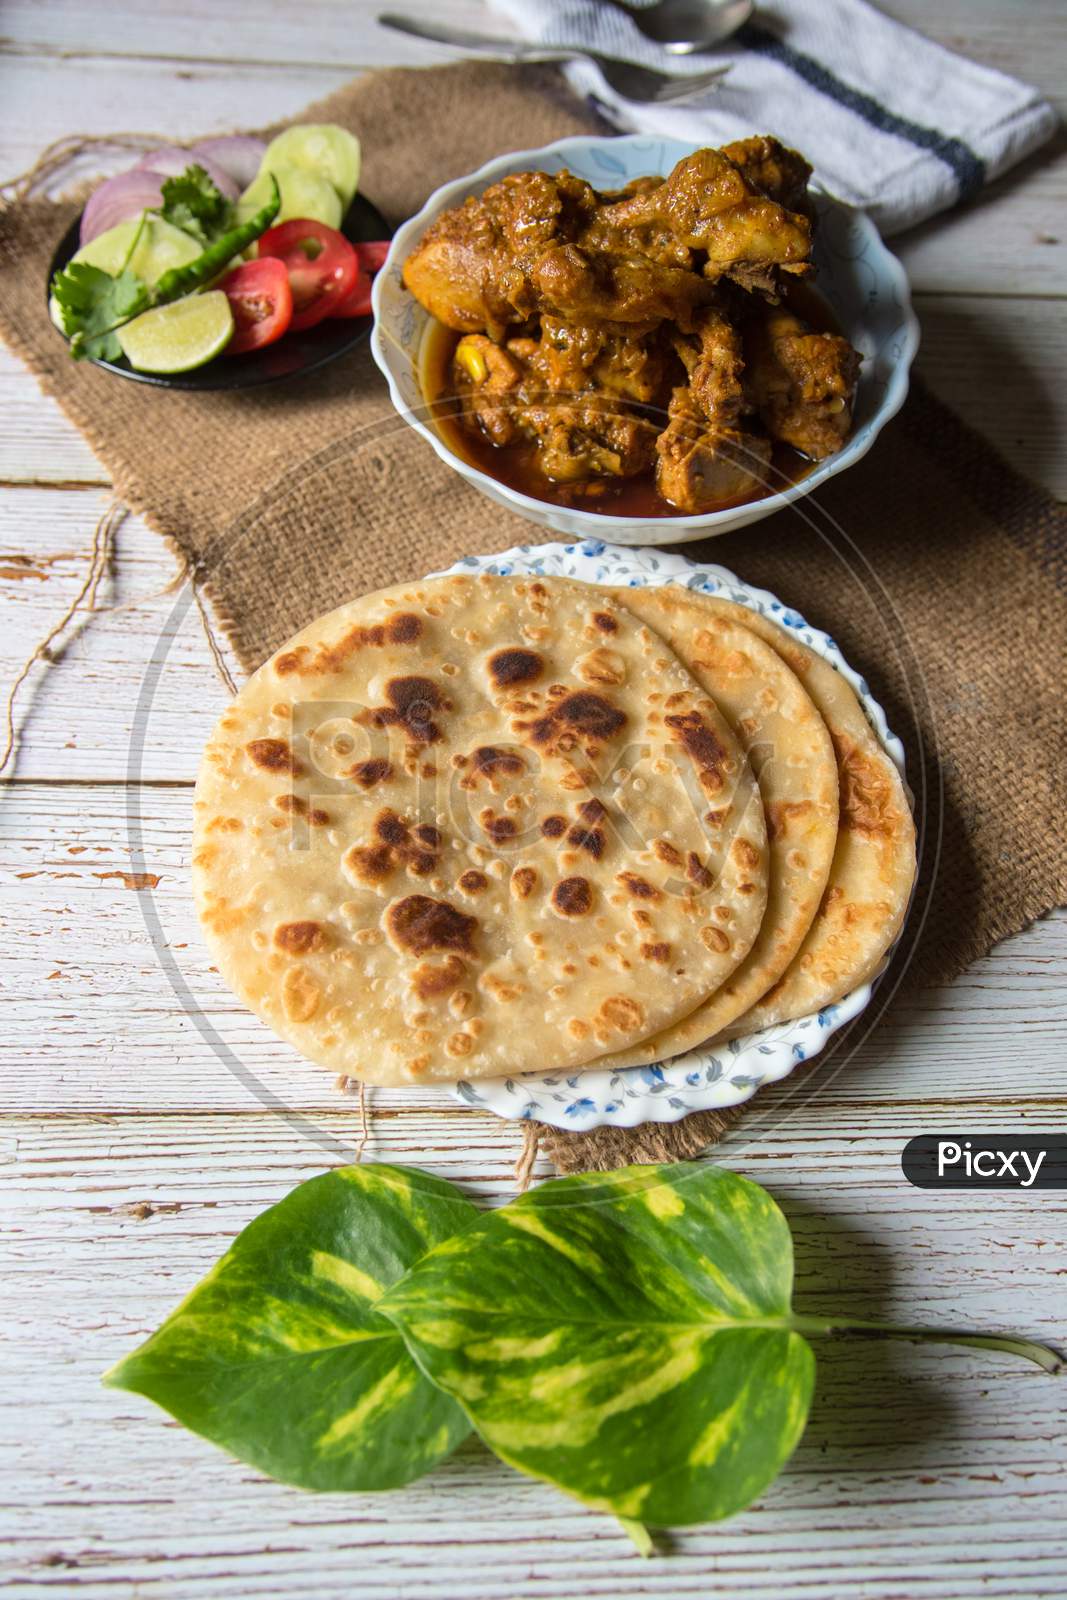 Paratha meaning an Indian style of bread made with flour